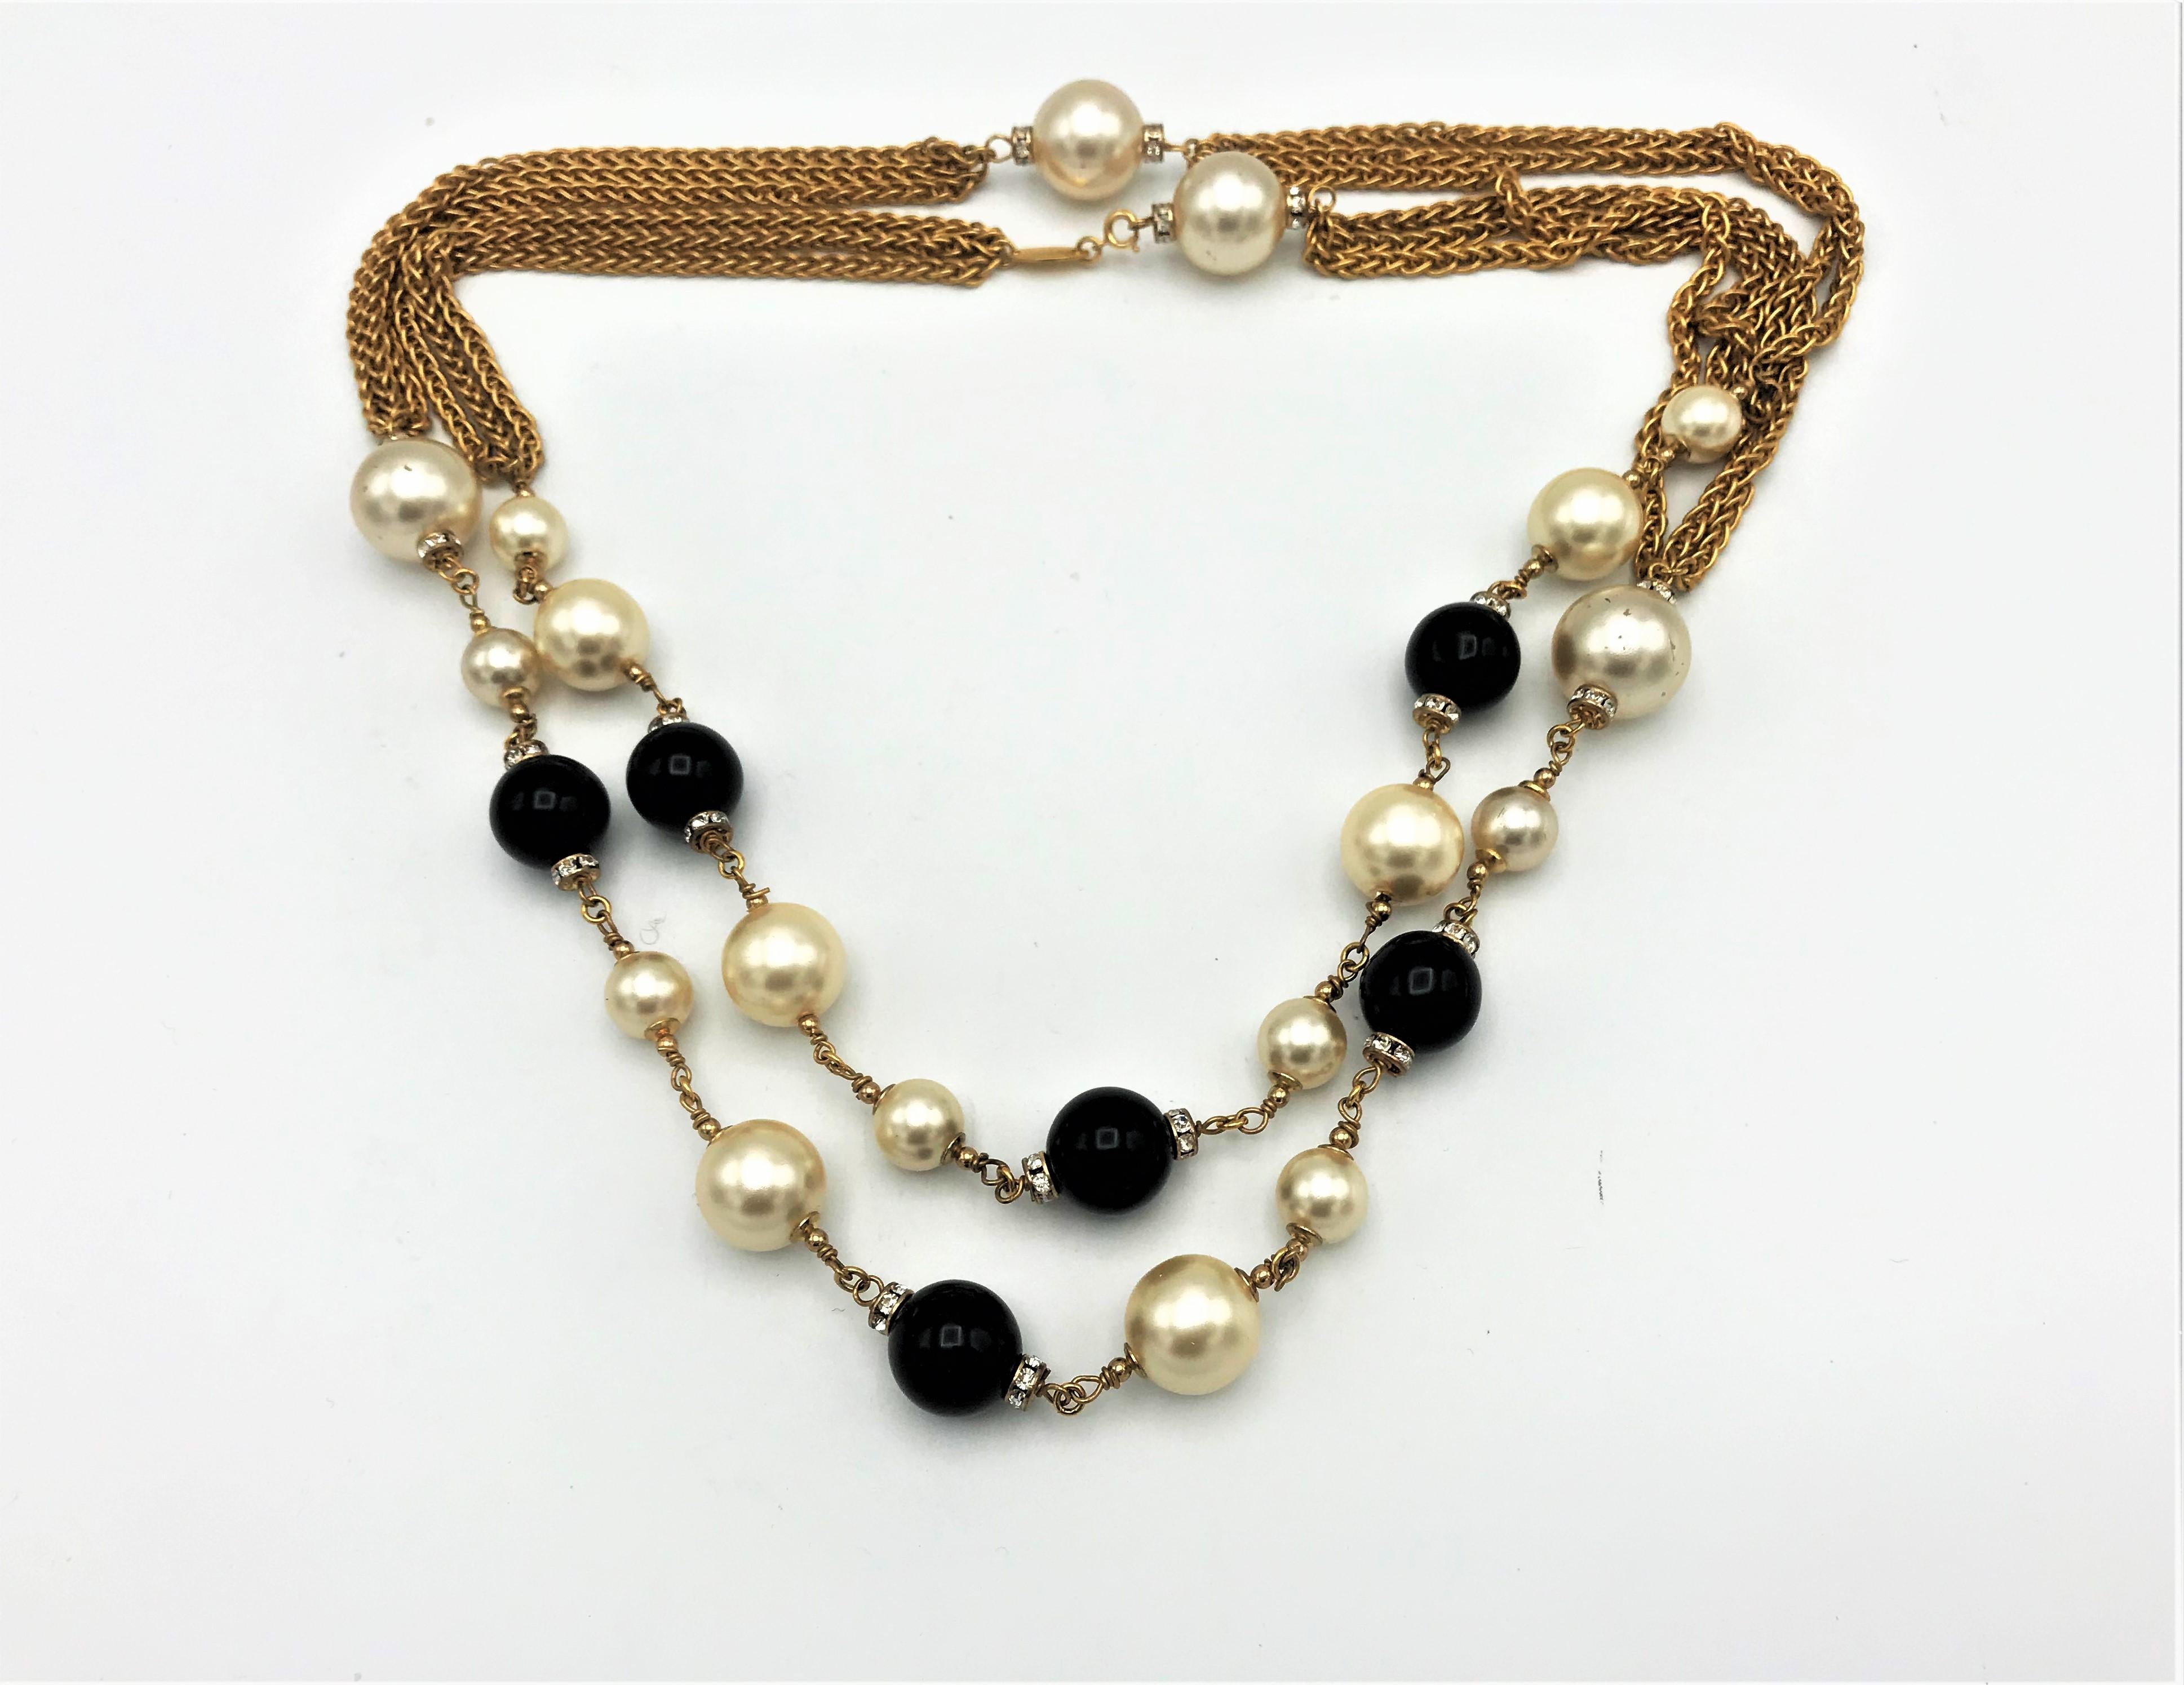 Very rare Chanel necklace/Sautoir with black Gripoix glass balls from the house of Gripoix Paris and imitation pearls, these are still provided with rhinestone rondels. 
Dimensions: length of the Sautoir 128 cm, pearls in the size from 1.6 cm to 0.7